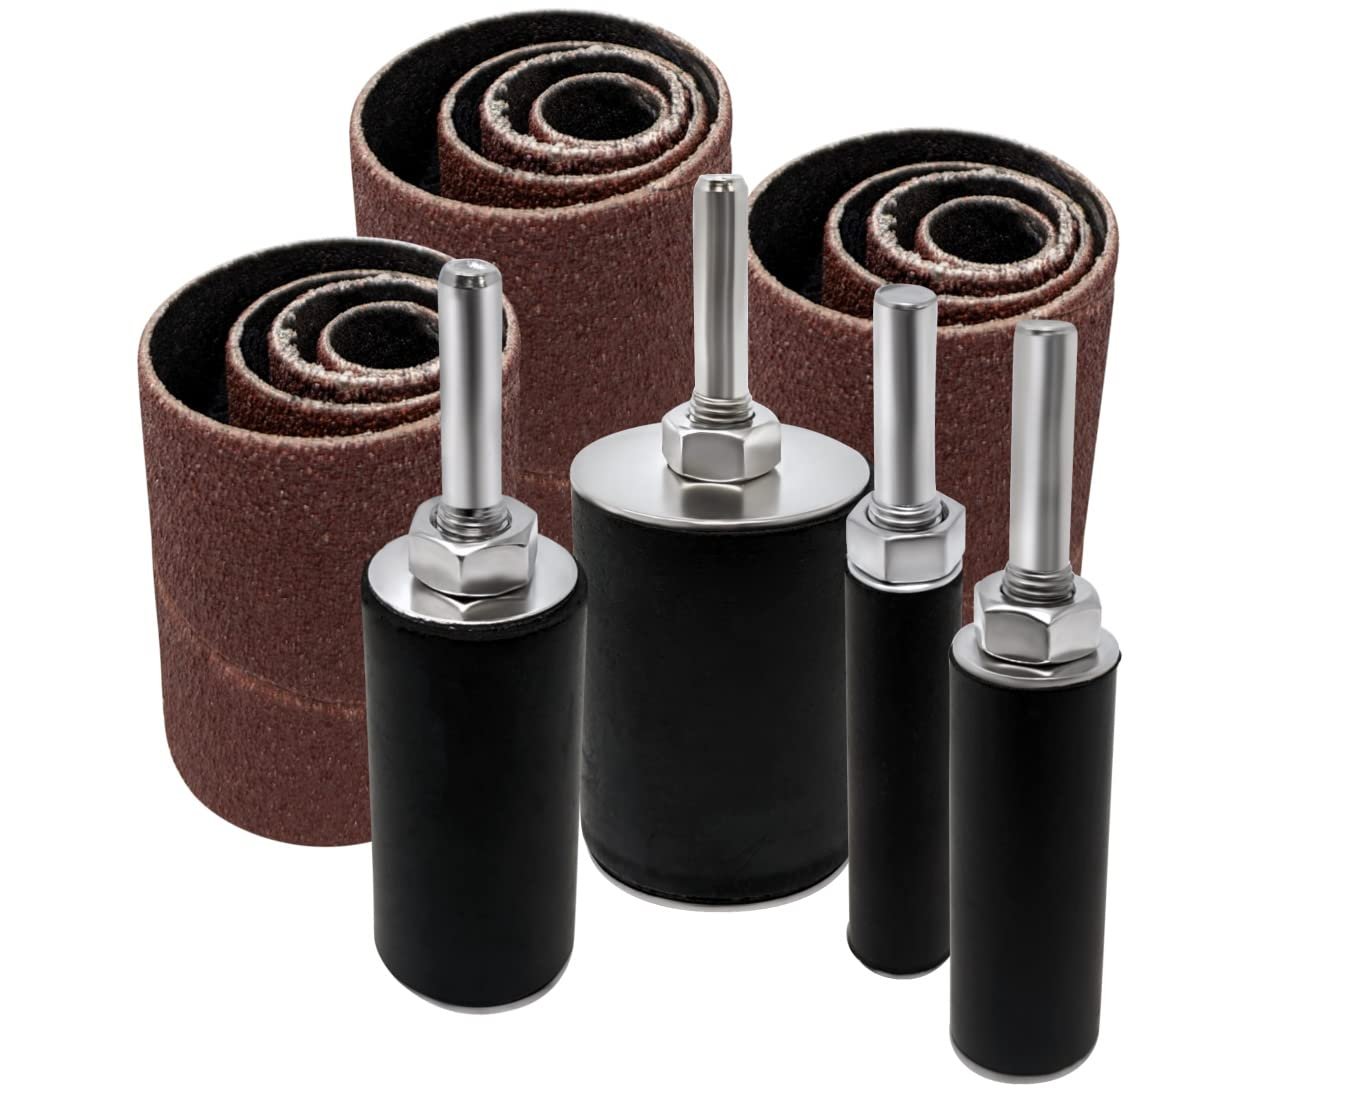 16pc 2" Long Sanding Drums and Sleeves Set for Drill